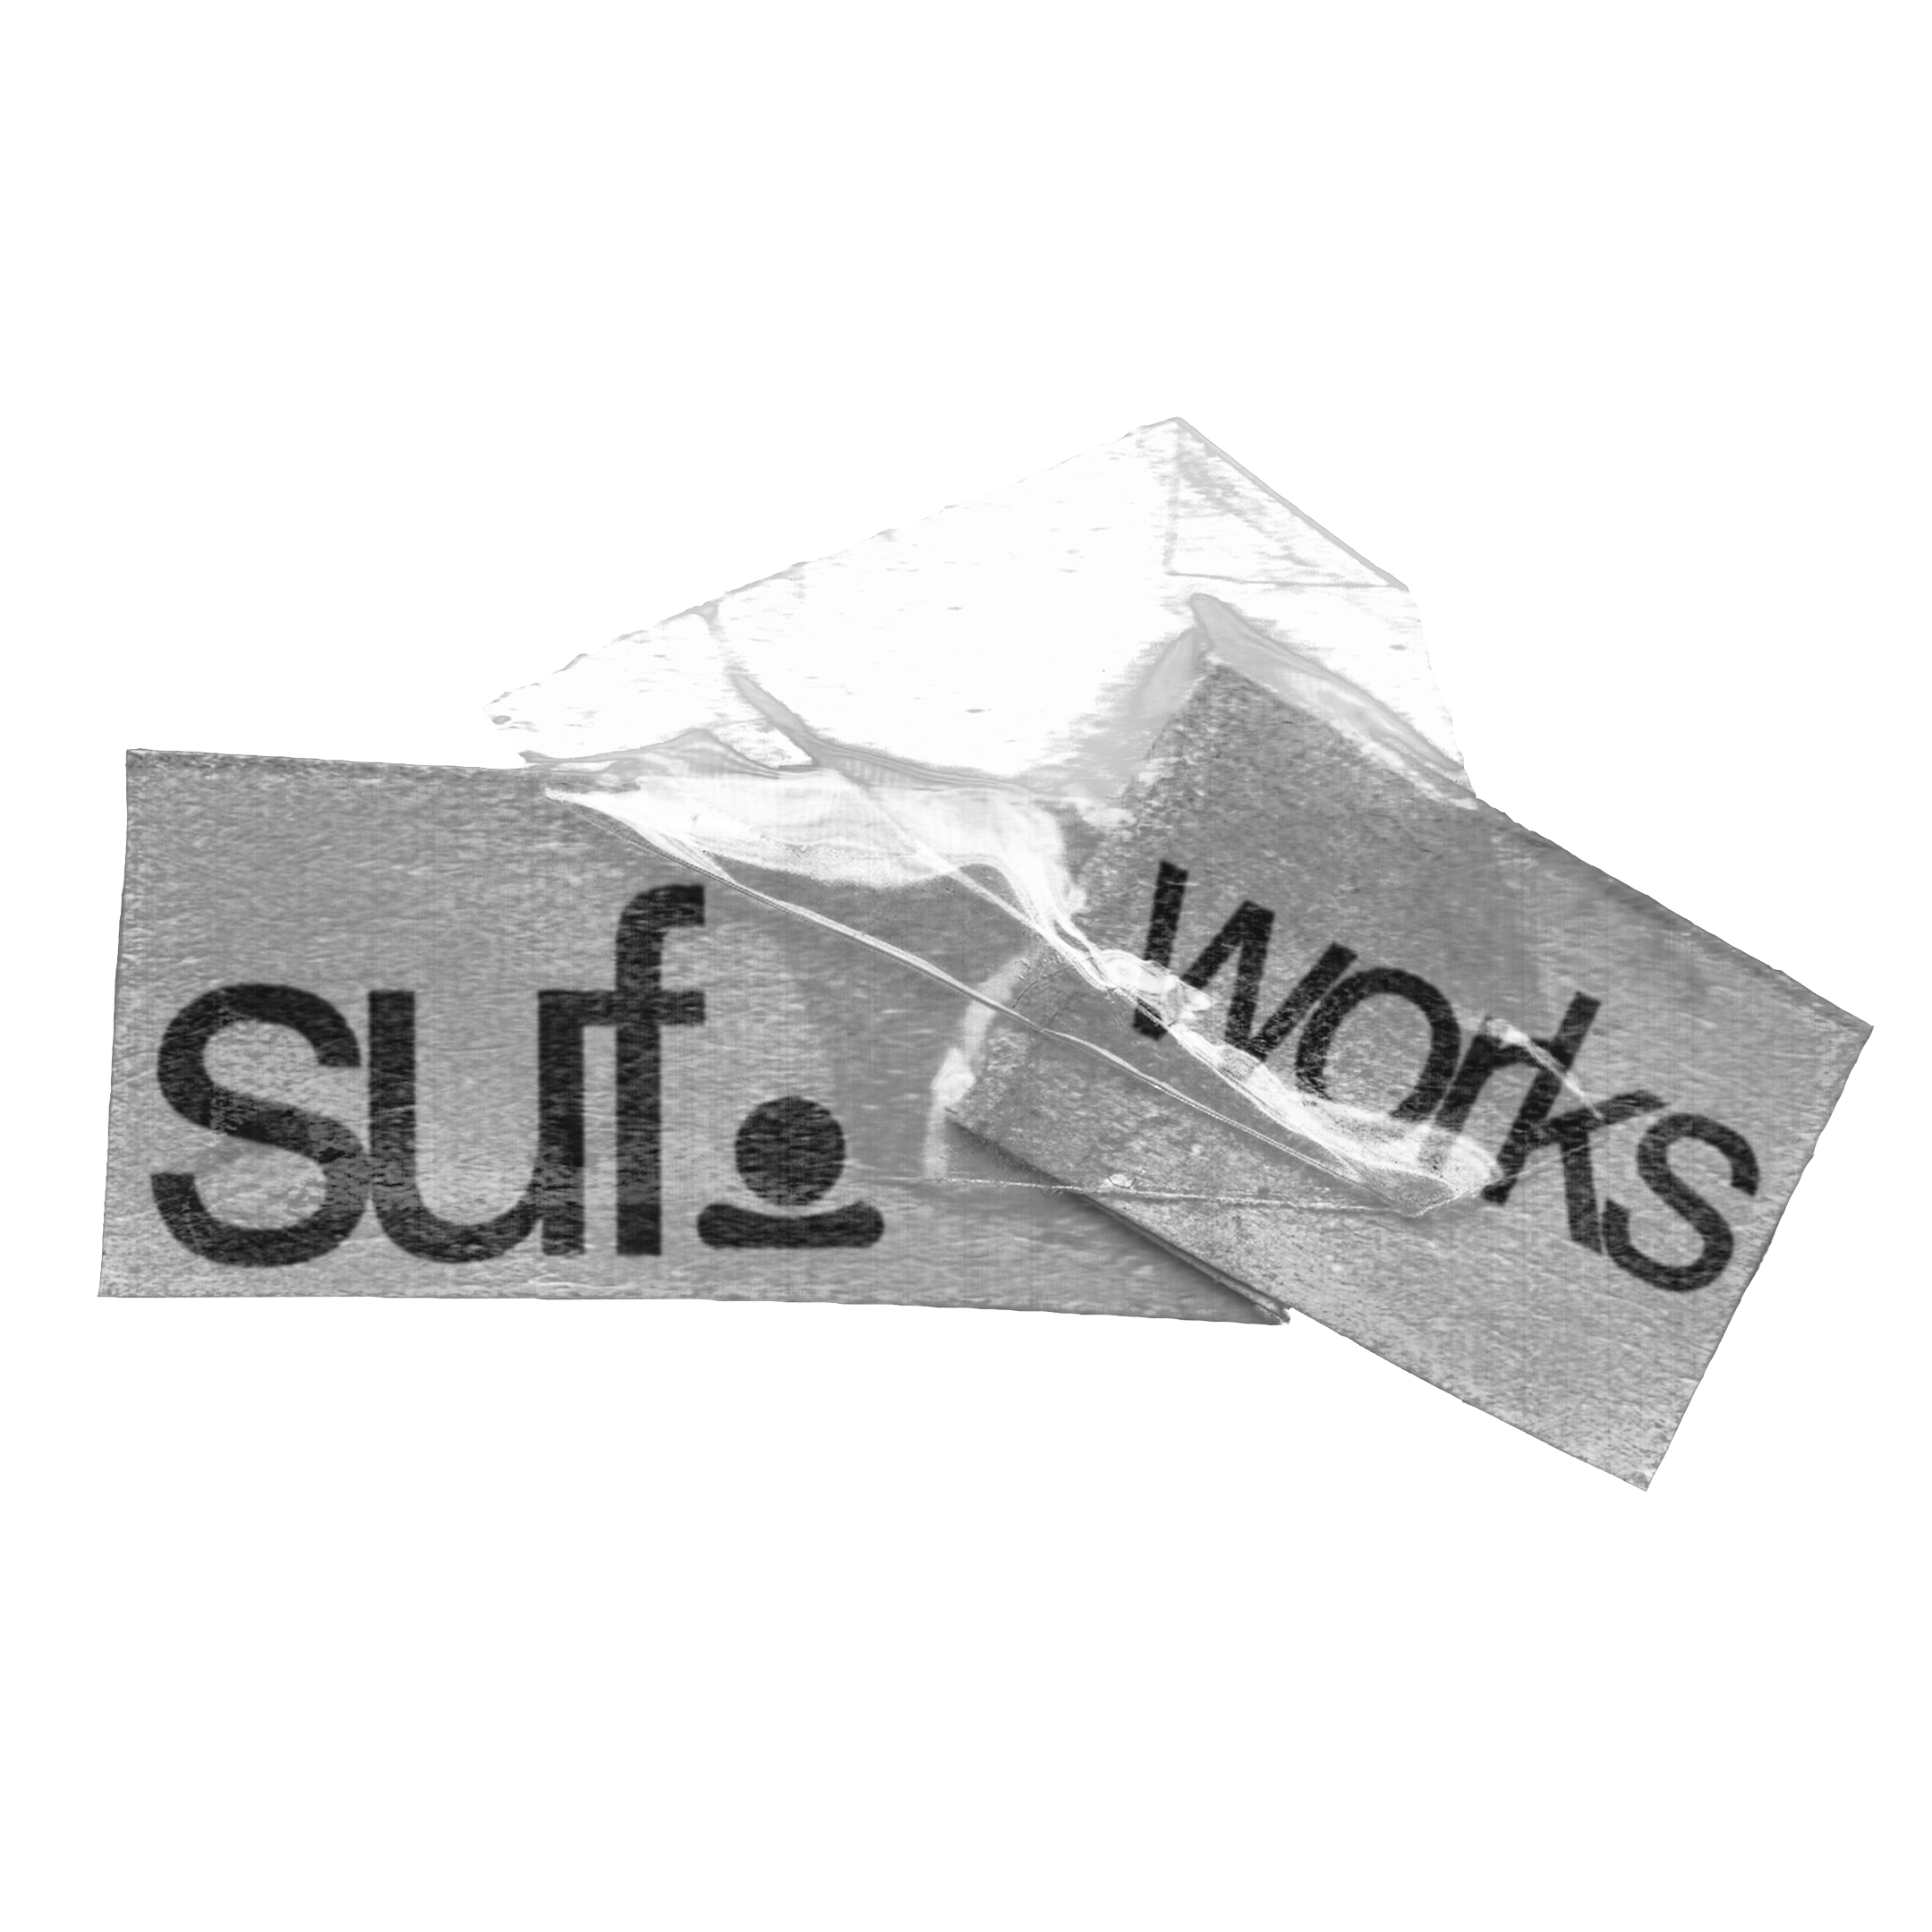 suf works